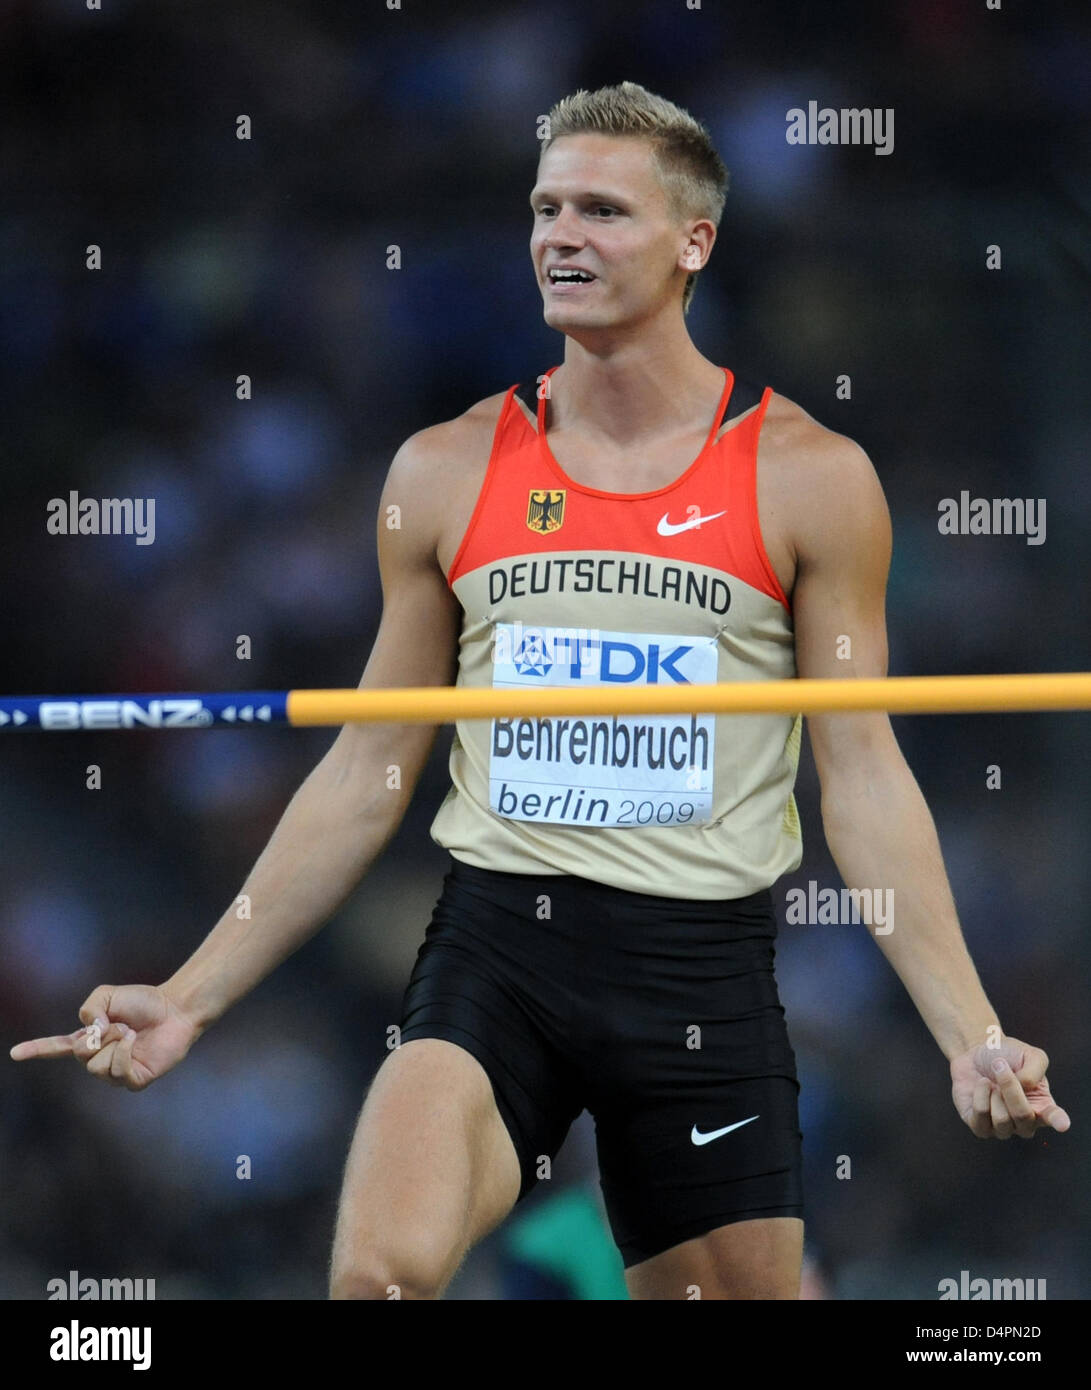 German Pascal Behrenbruch cheers during the high jump event of the decathlon at the 12th IAAF World Championships in Athletics, Berlin, Germany, 19 August 2009. Photo: Bernd Thissen Stock Photo